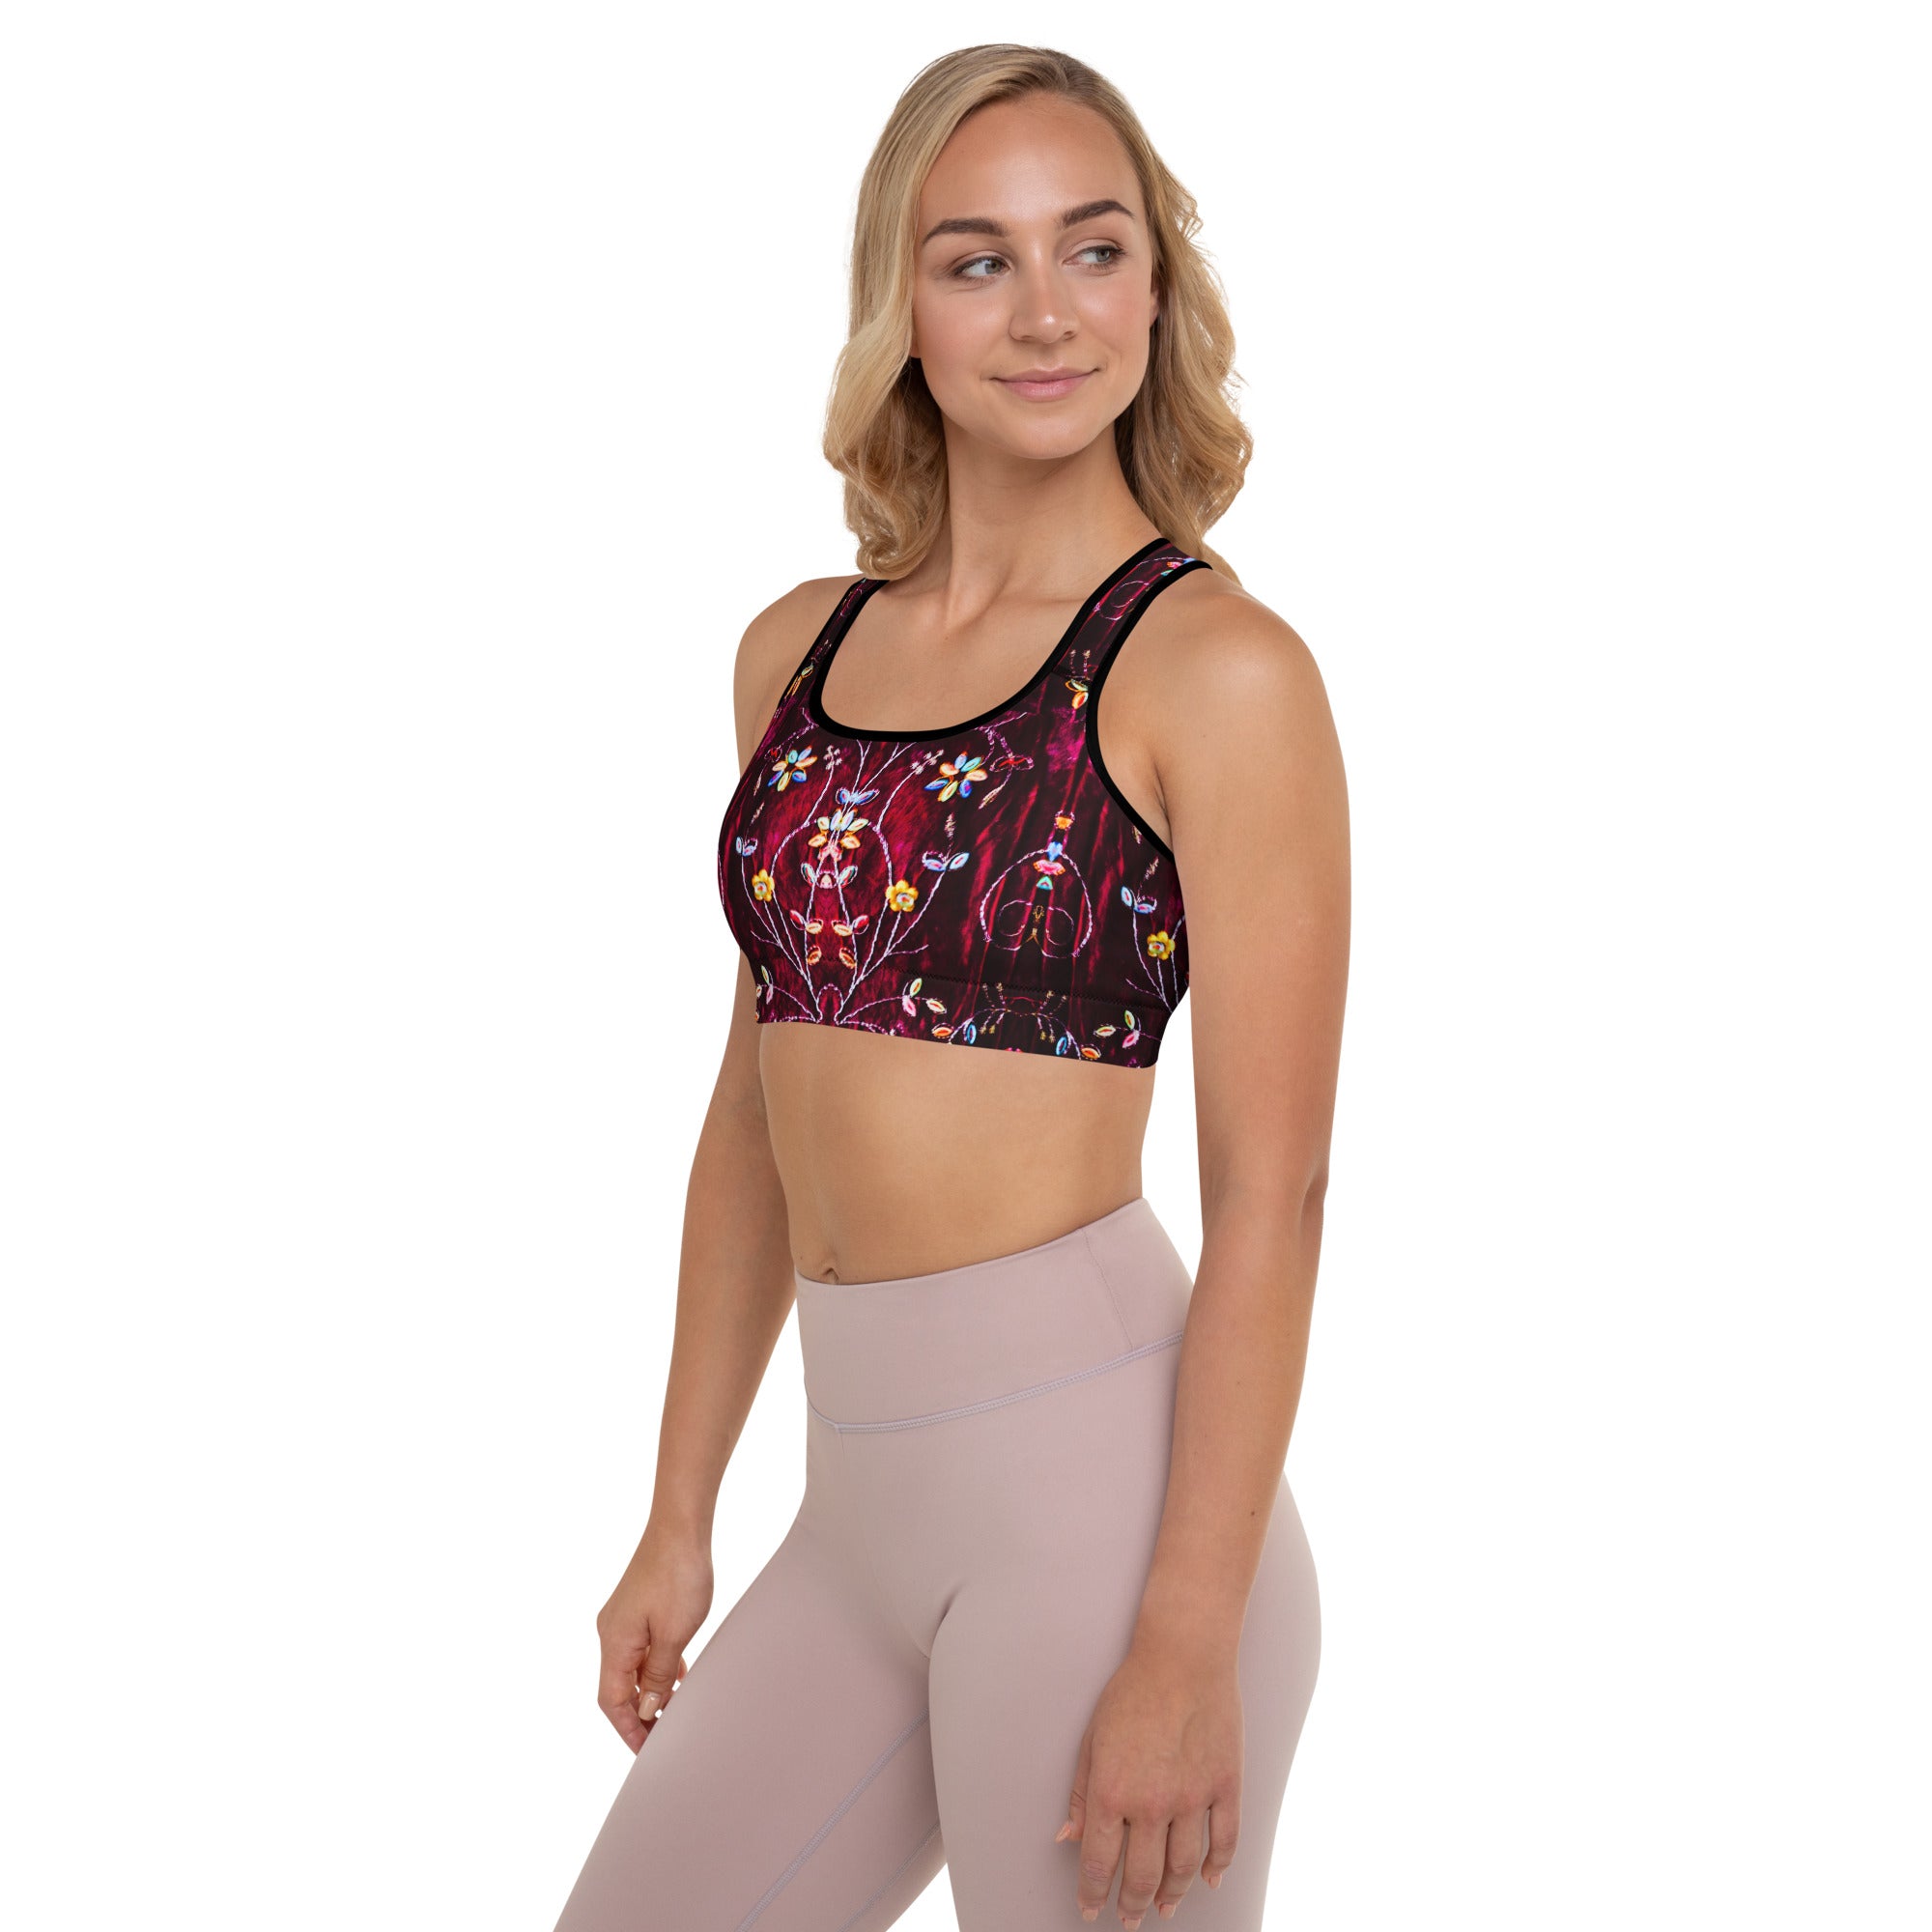 Buy Abstract Art Sports Bra Support Fitness Workout Activewear Gym  Sportswear Women Gear Raceback Straps Bralette Crop Top Outfit Colorful  Online in India 